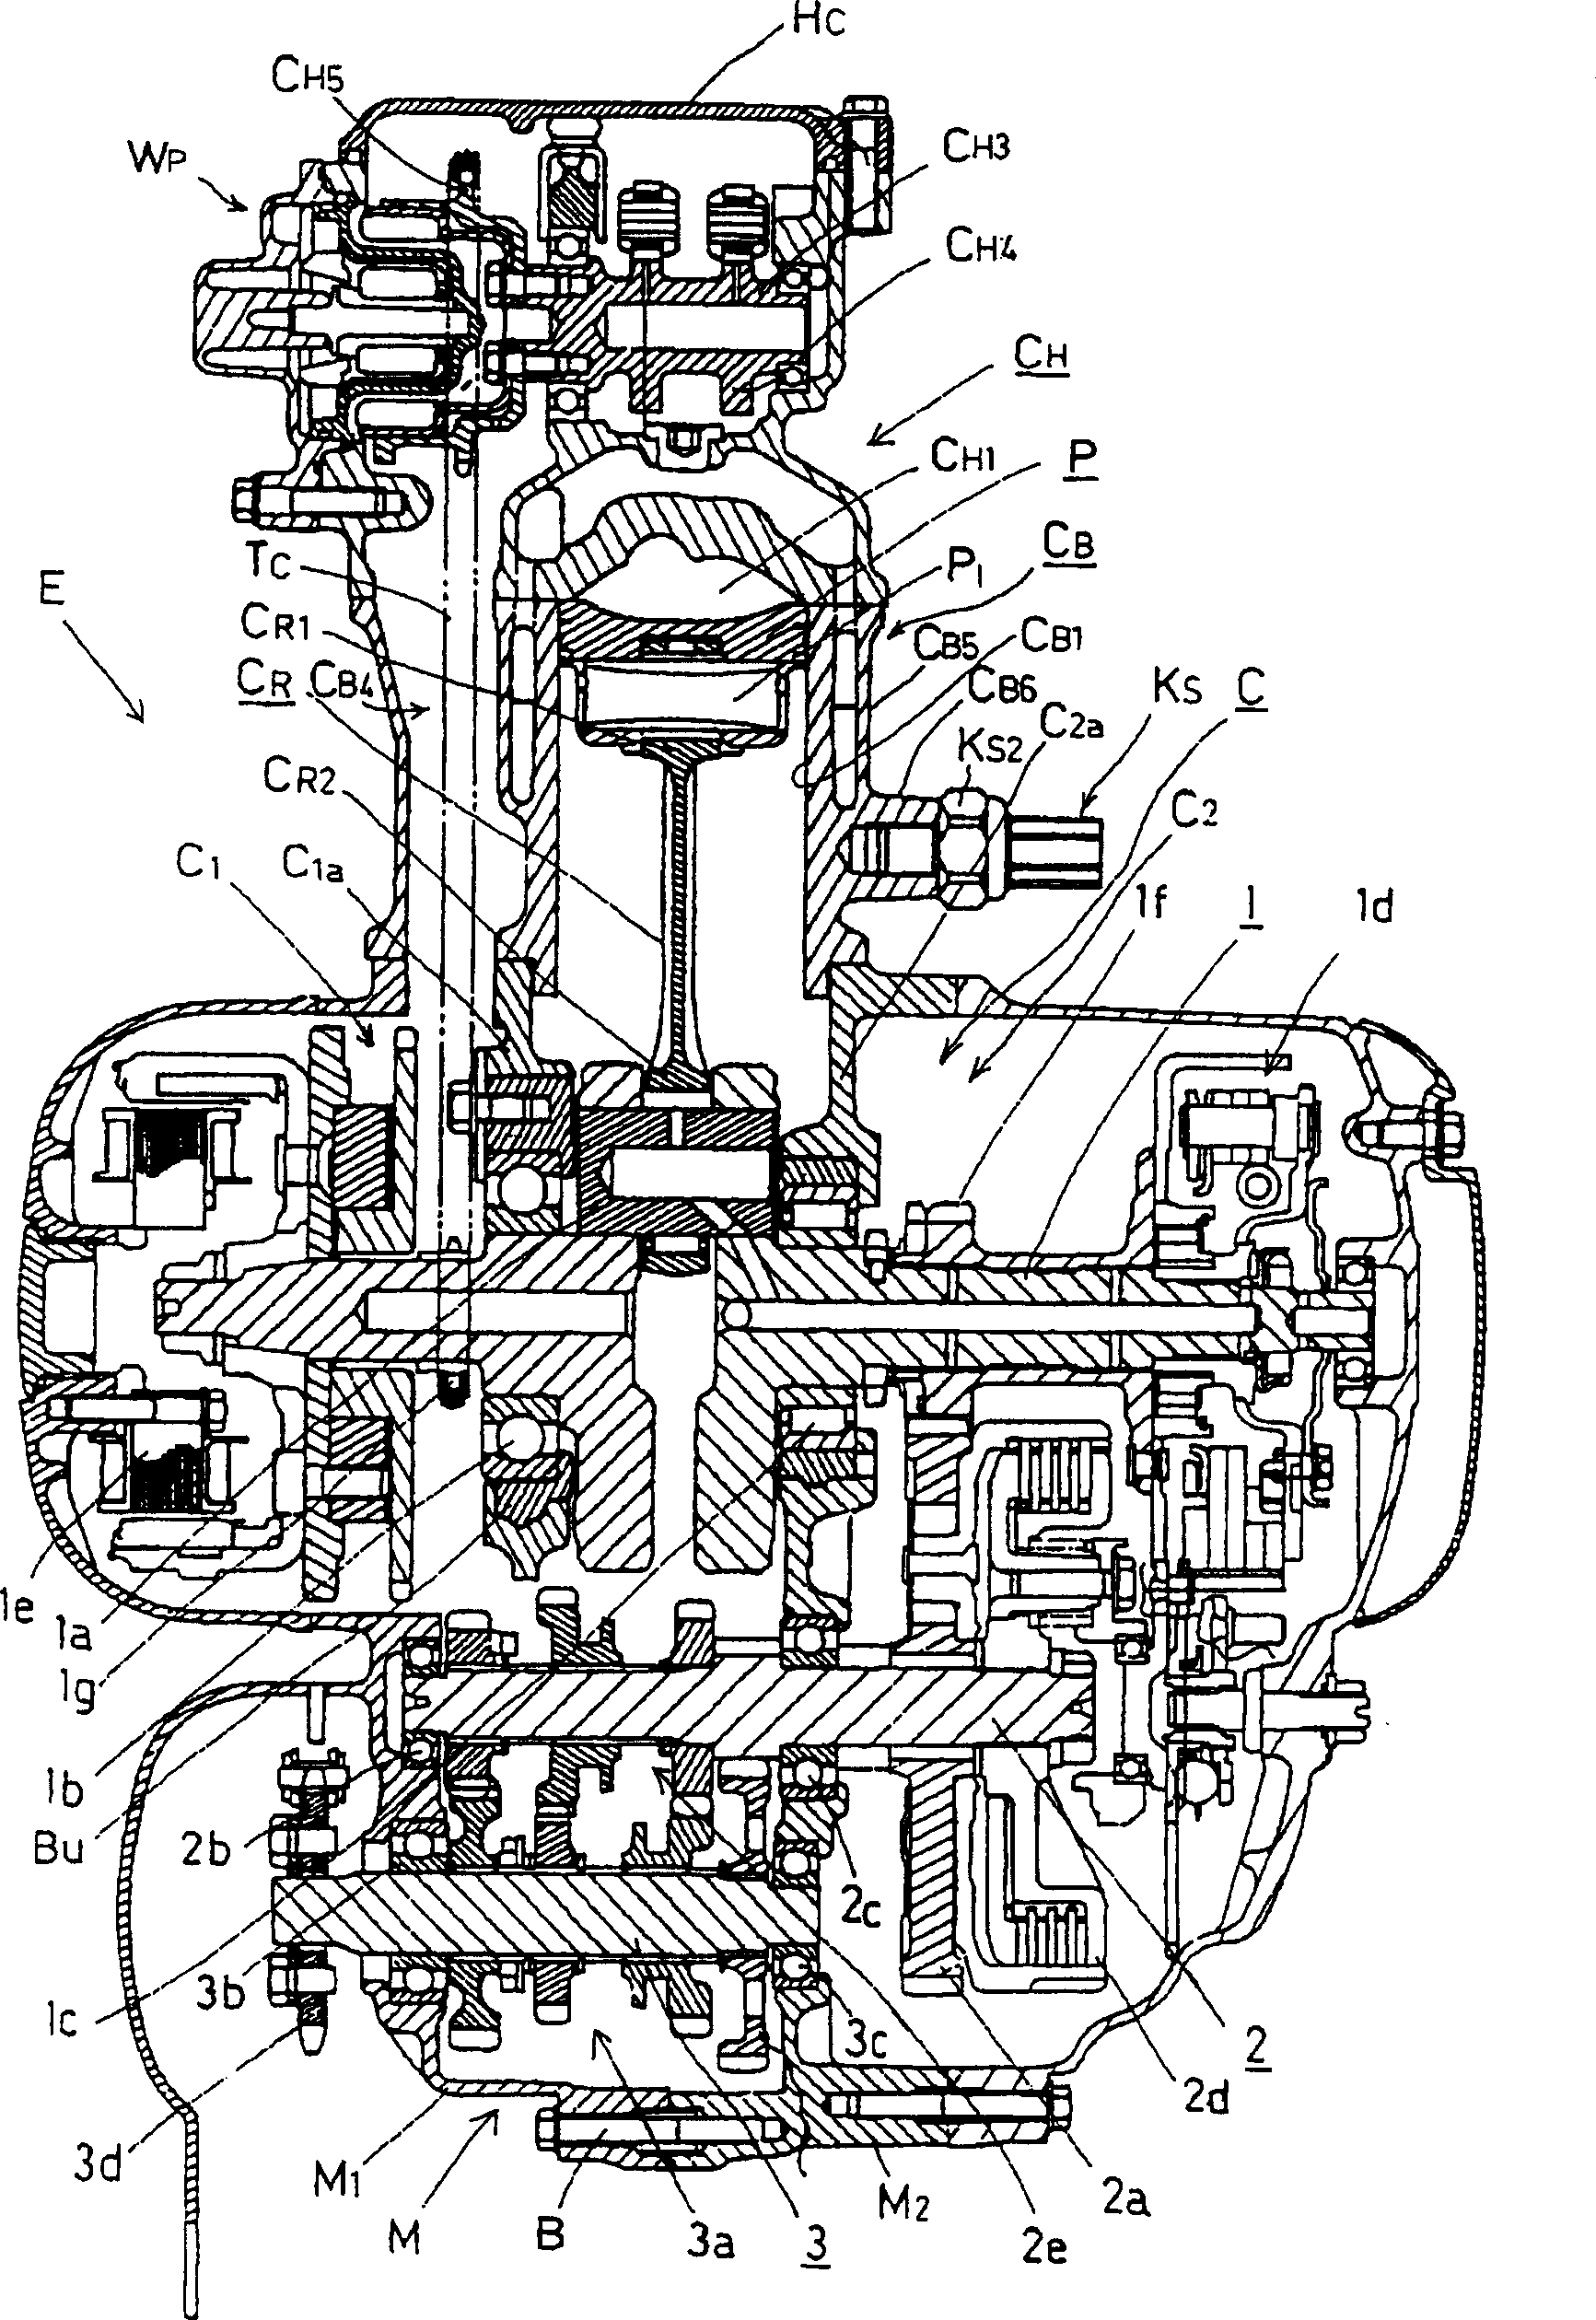 Installation structure of knockmeter in internal combustion engine